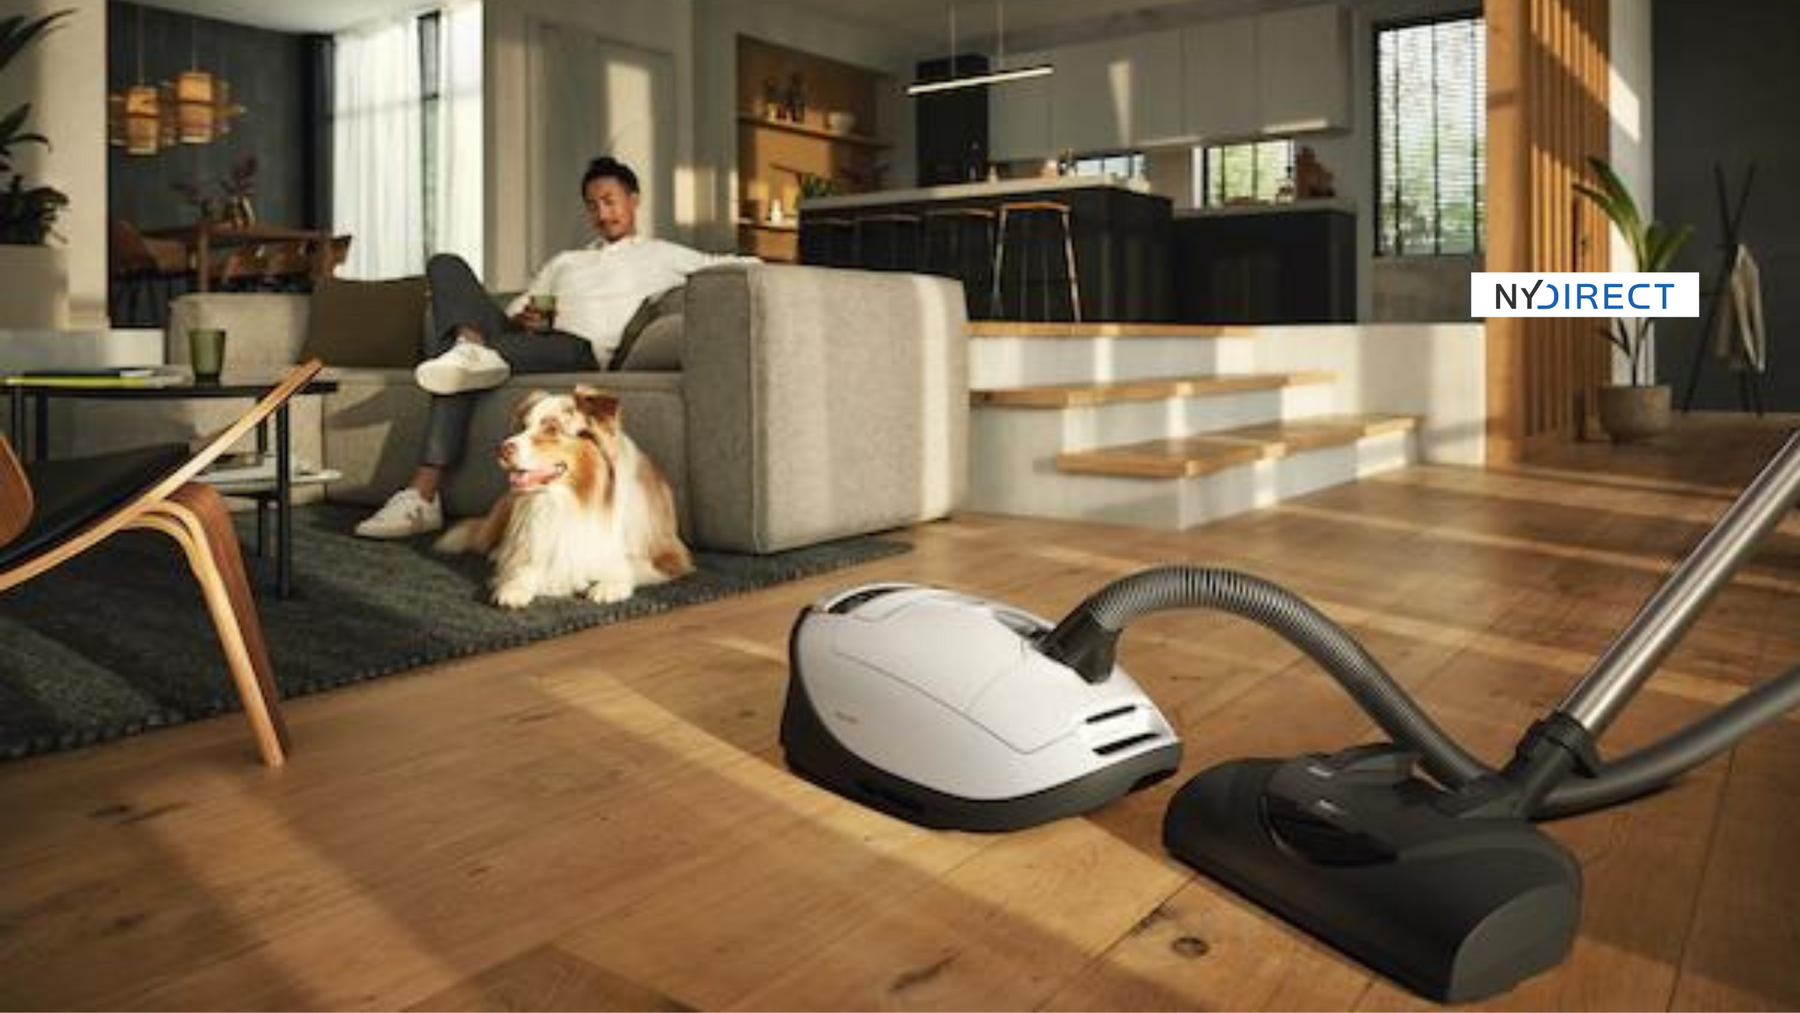 Don't Skimp on Cleanliness - Why You Need a Quality Vacuum to Last for Years to Come